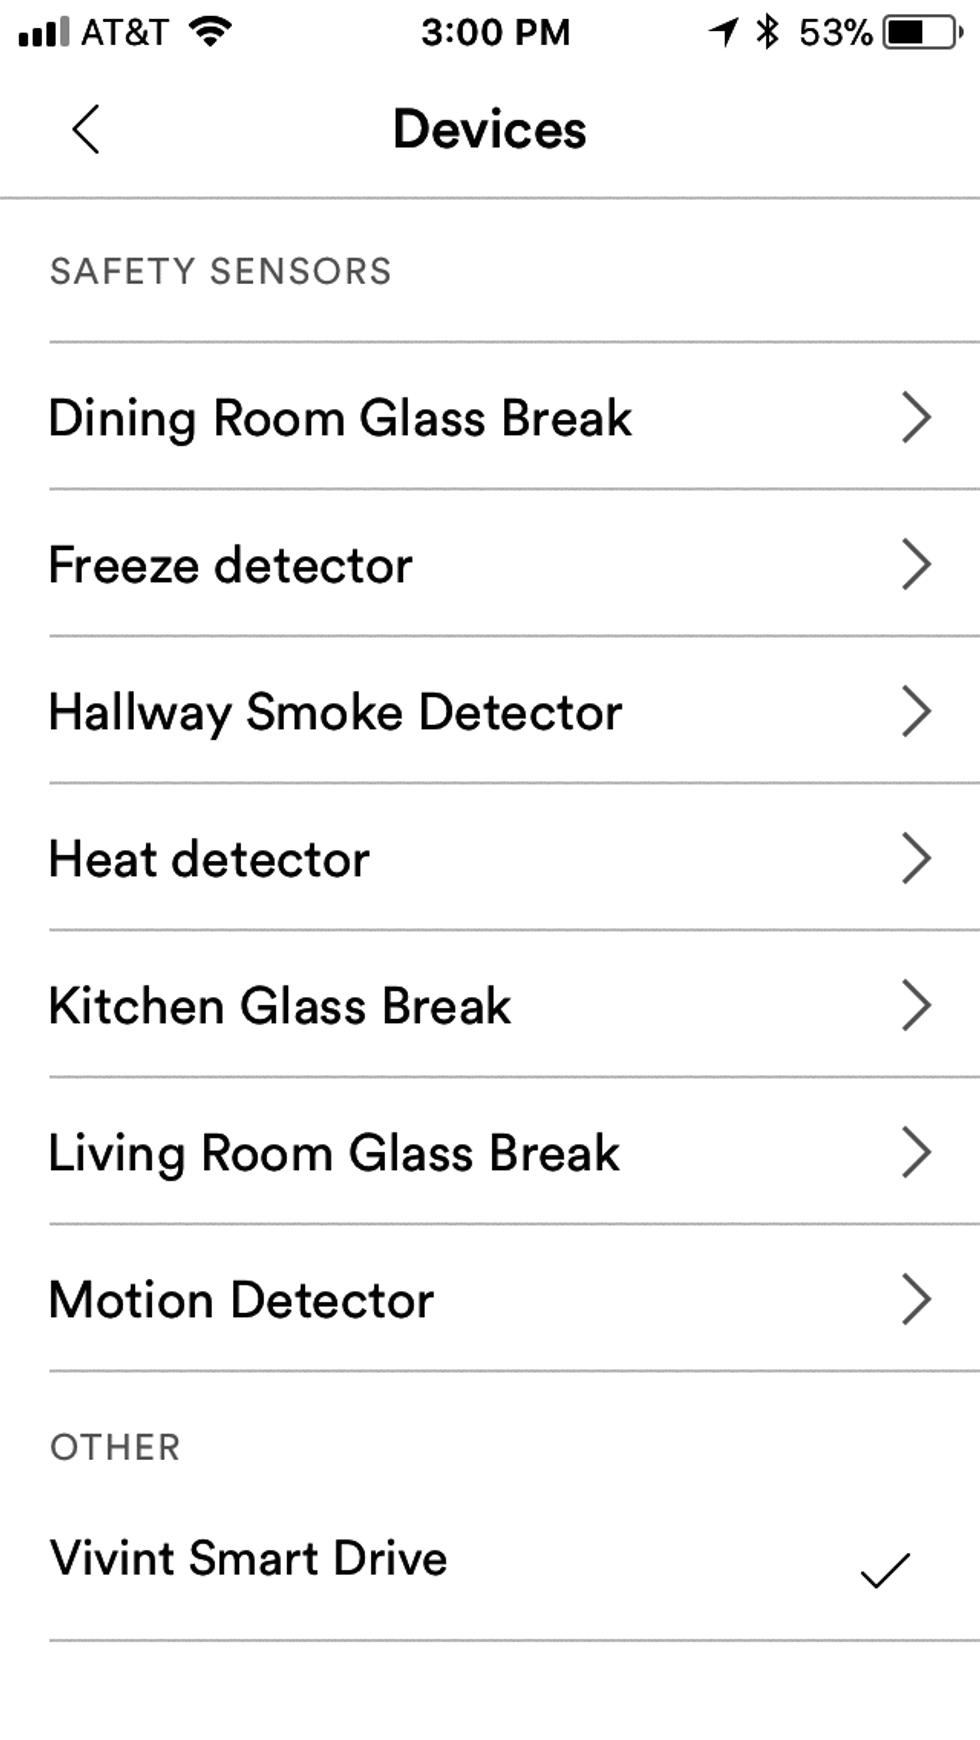 Vivint mobile app showing devices you can add to your Vivint Smart Home system.